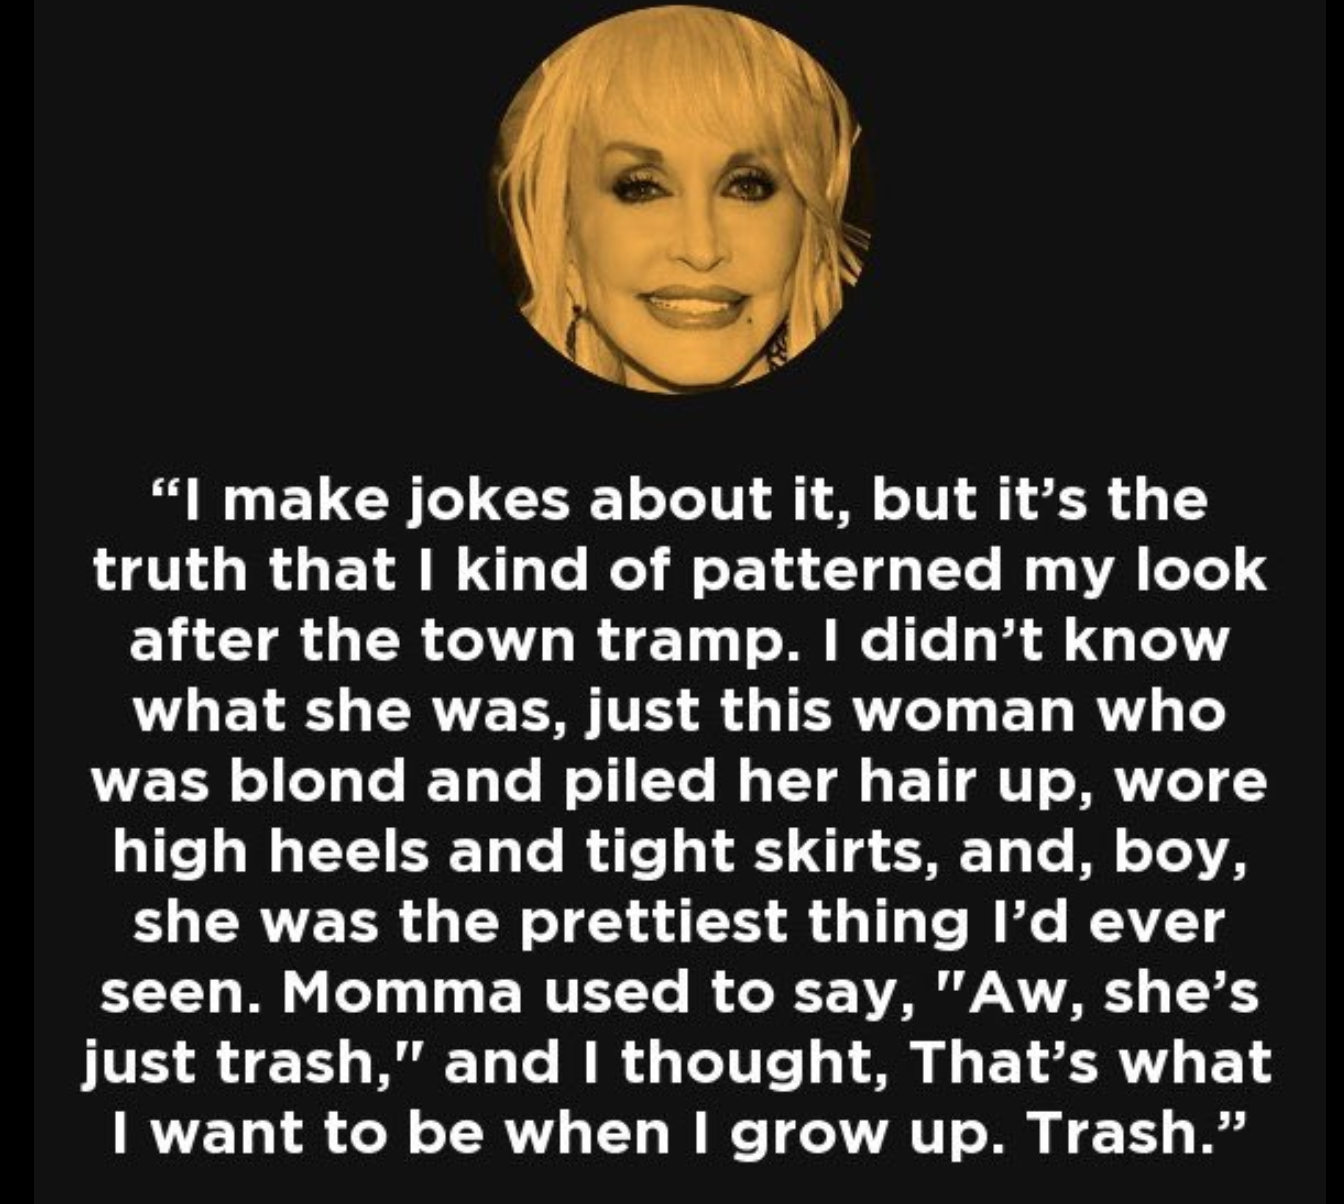 Quotes about trashy females